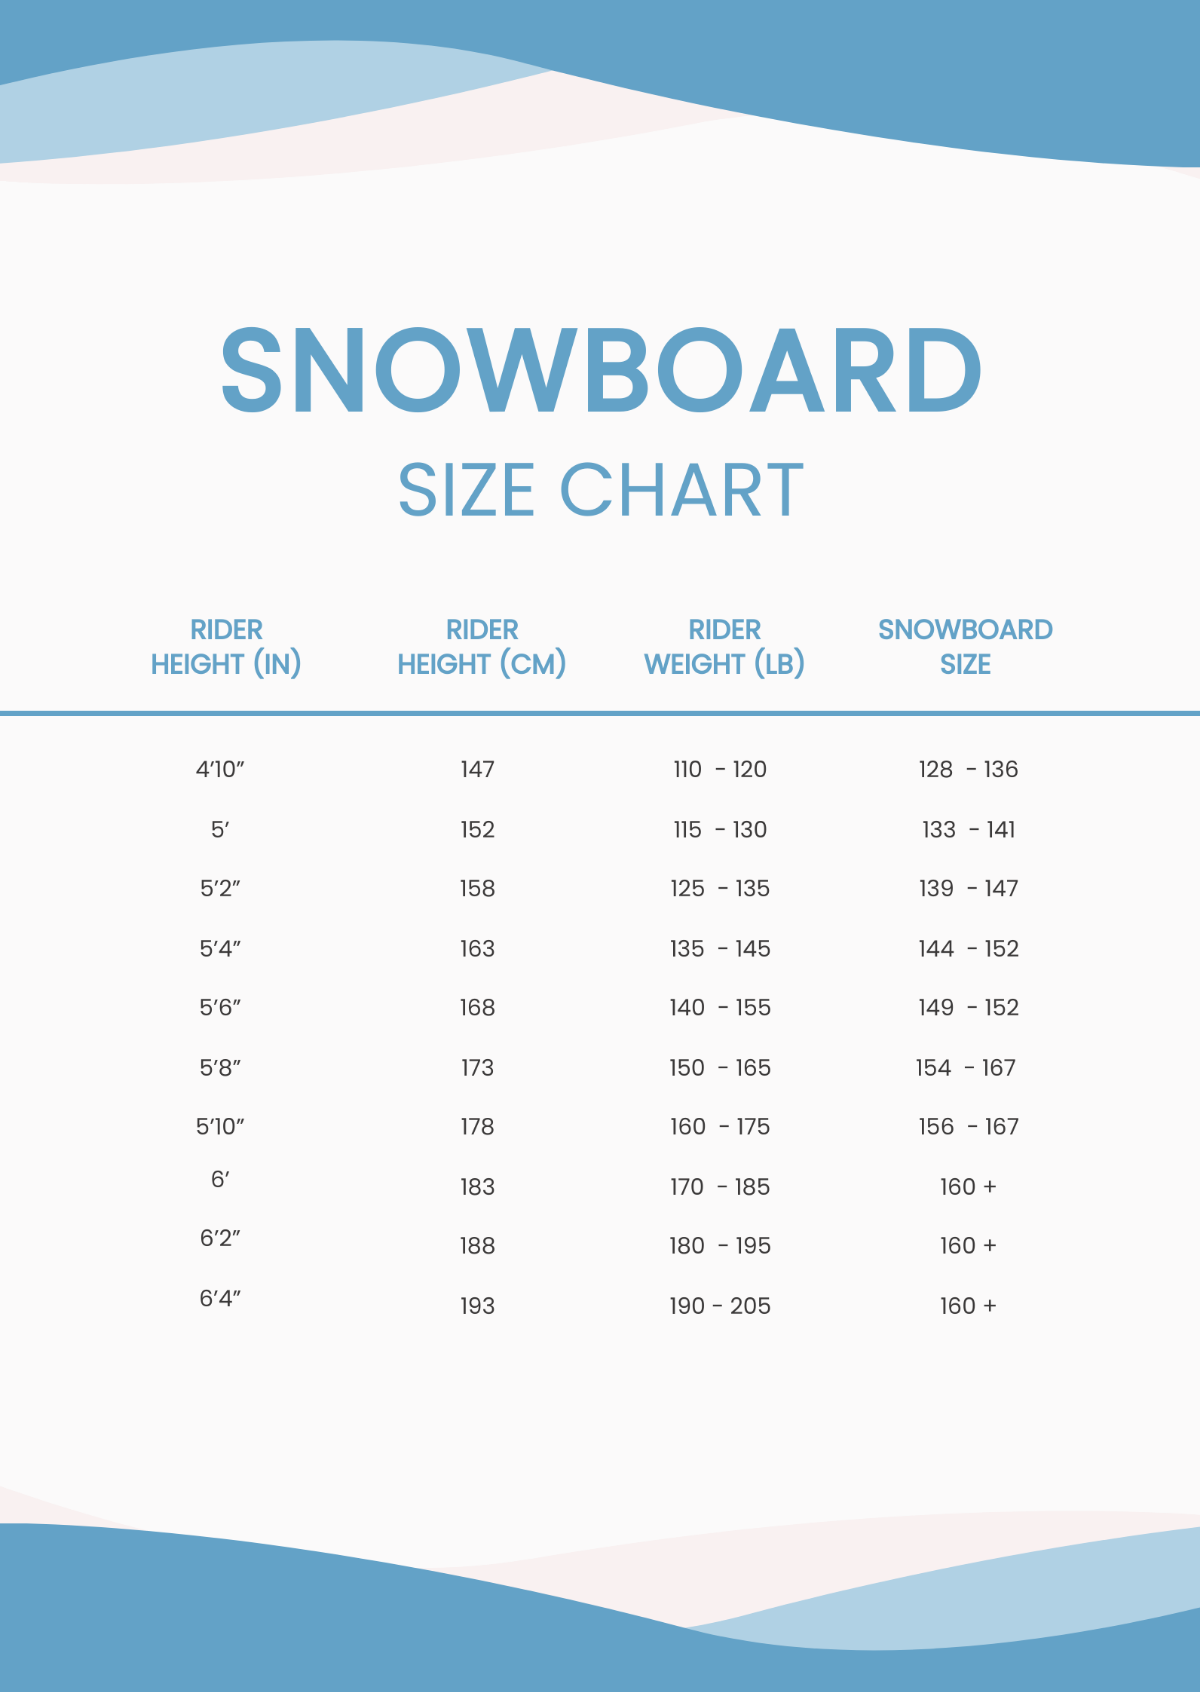 FREE Snowboard Size Chart Templates & Examples - Edit Online & Download ...